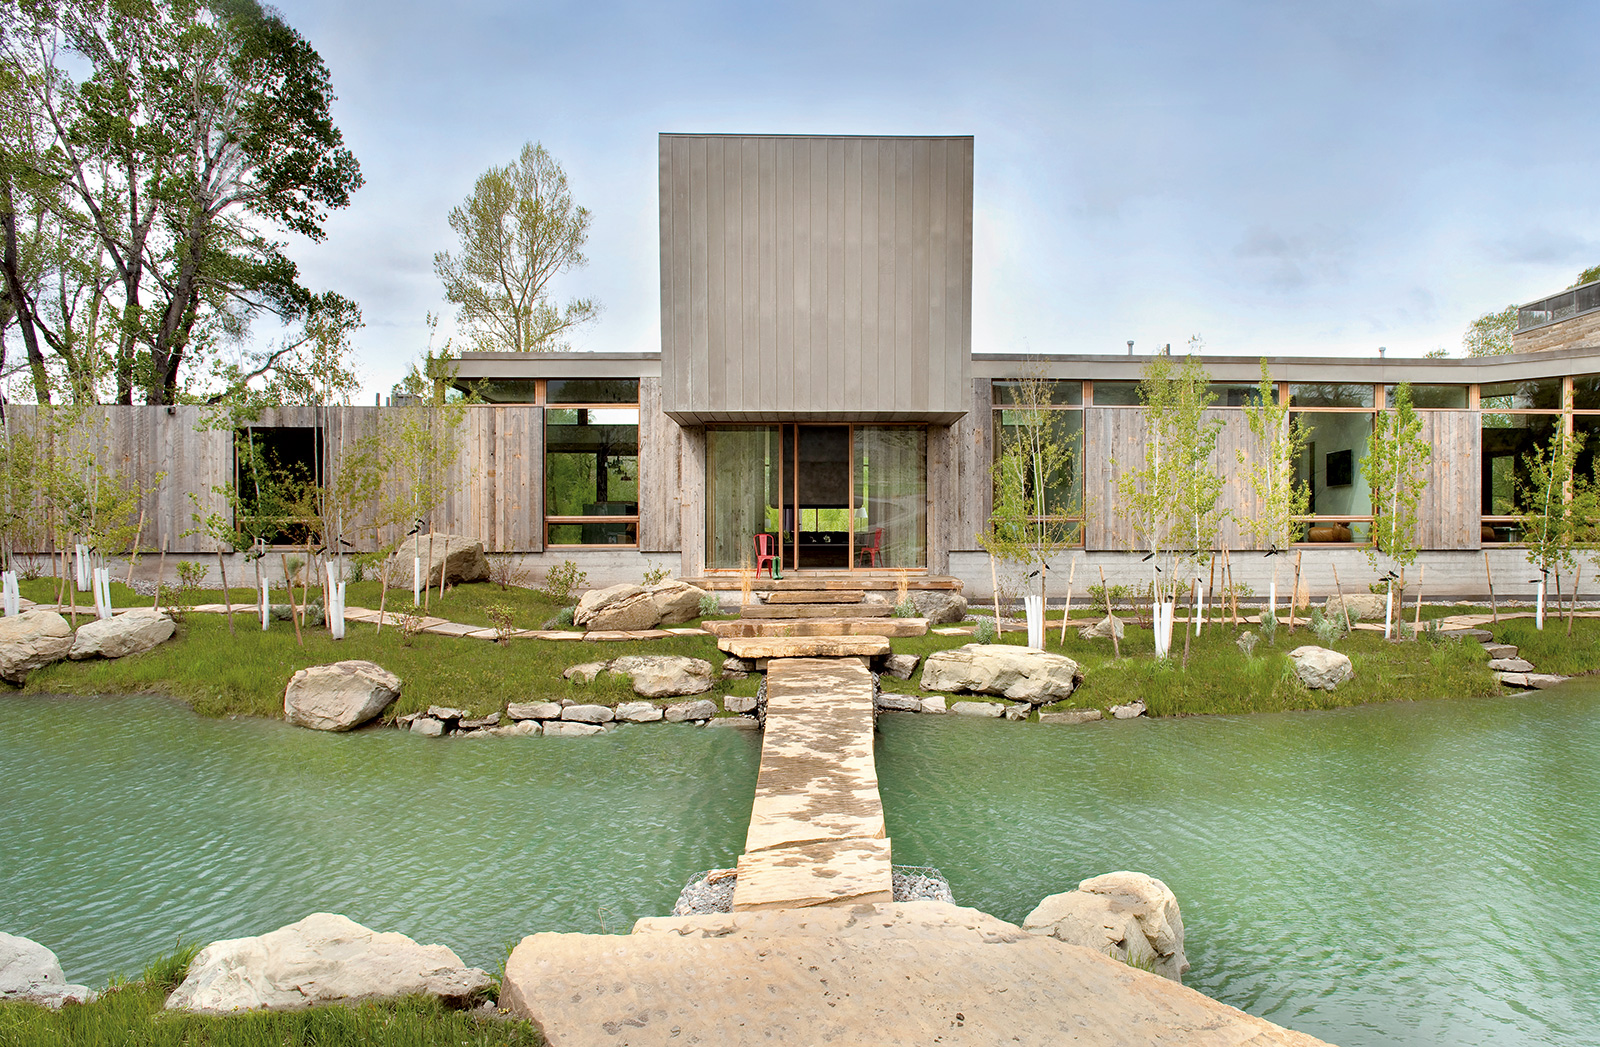 Living on water: Watershed Lodge by HUUM architecture